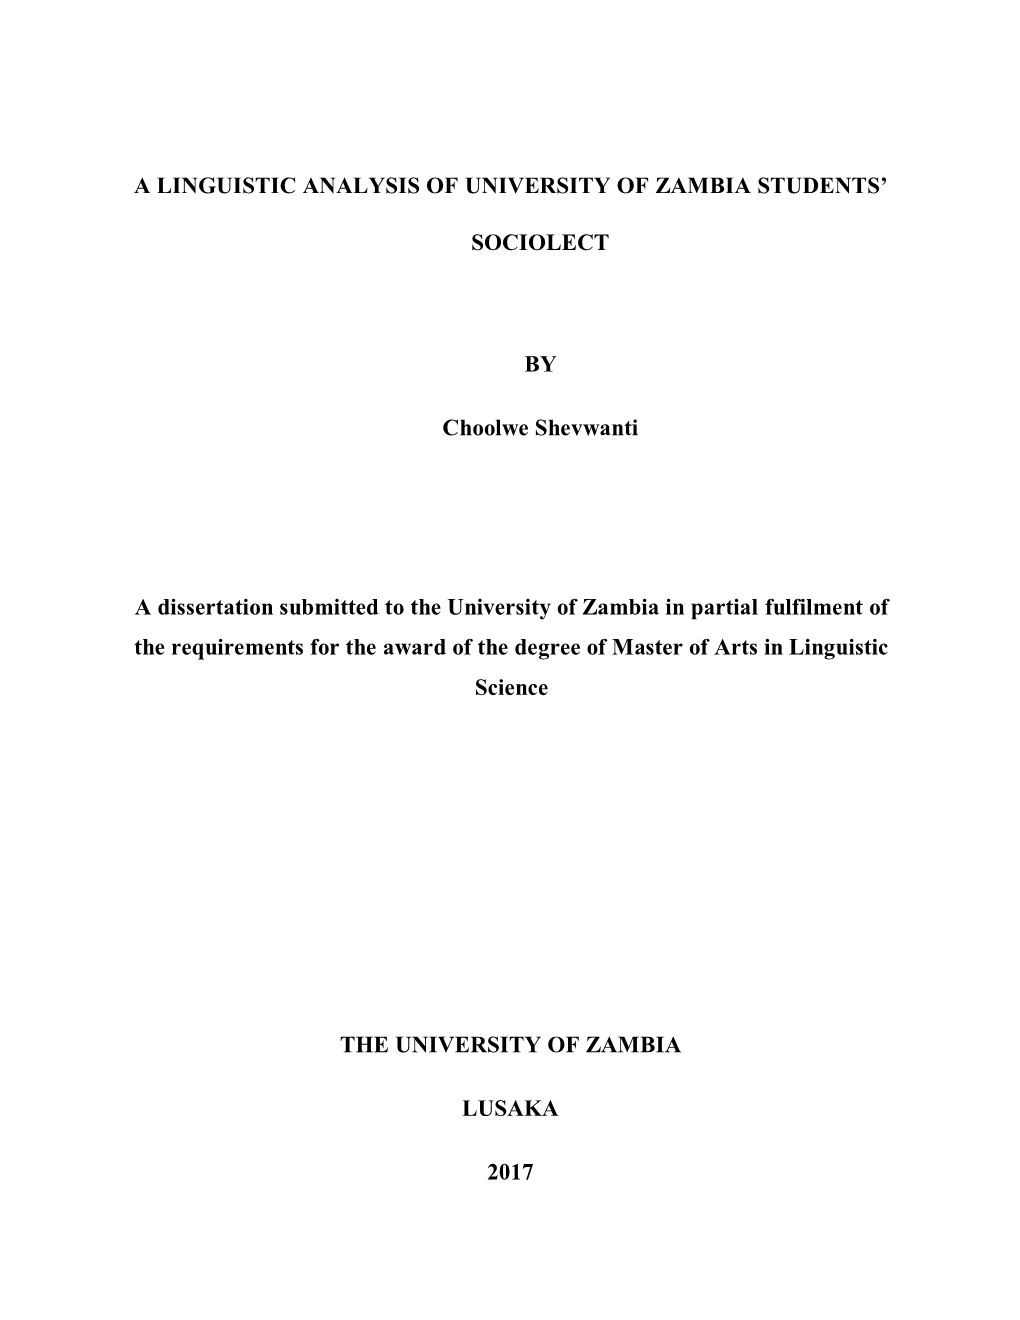 A LINGUISTIC ANALYSIS of UNIVERSITY of ZAMBIA STUDENTS' SOCIOLECT by Choolwe Shevwanti a Dissertation Submitted to the Univers